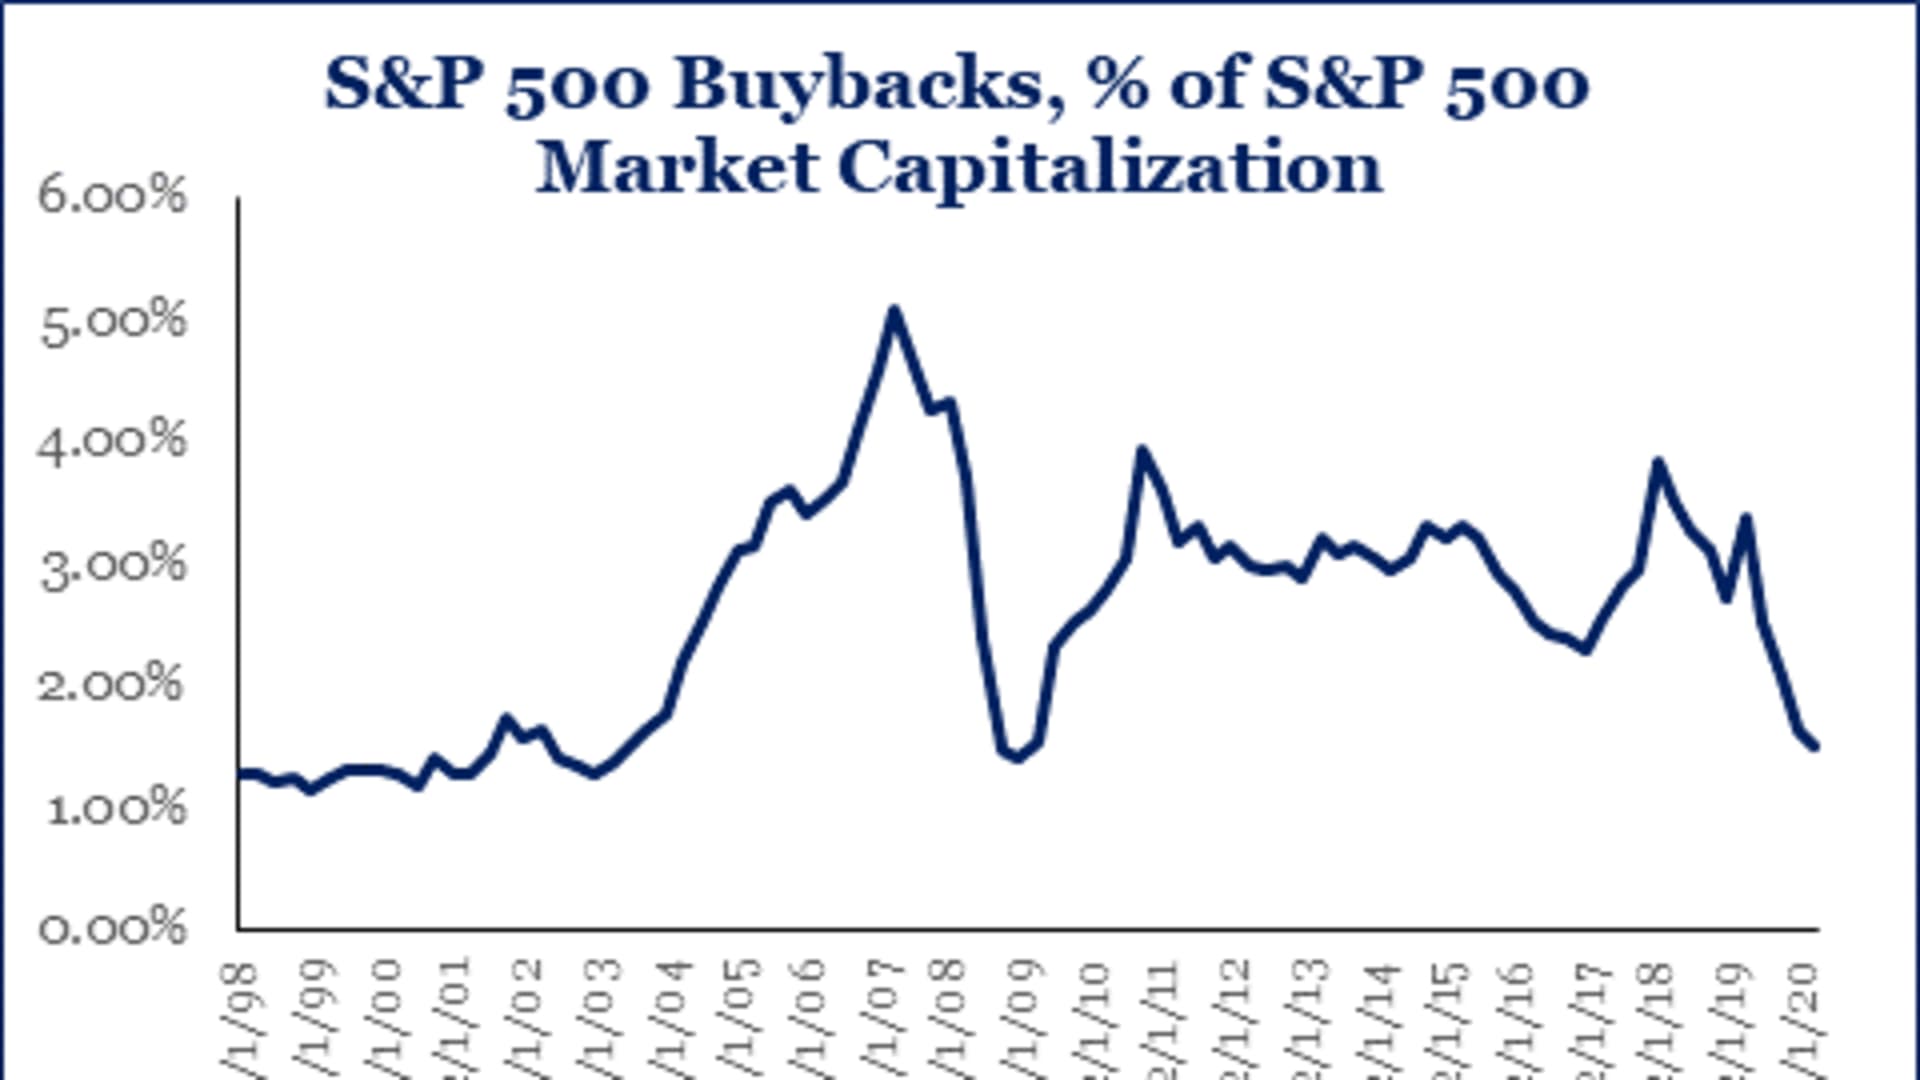 While stock buybacks have played a big role in the market in recent decades, the most recent trend has been a decline in influence, according to data provided by Strategas Research Partners.